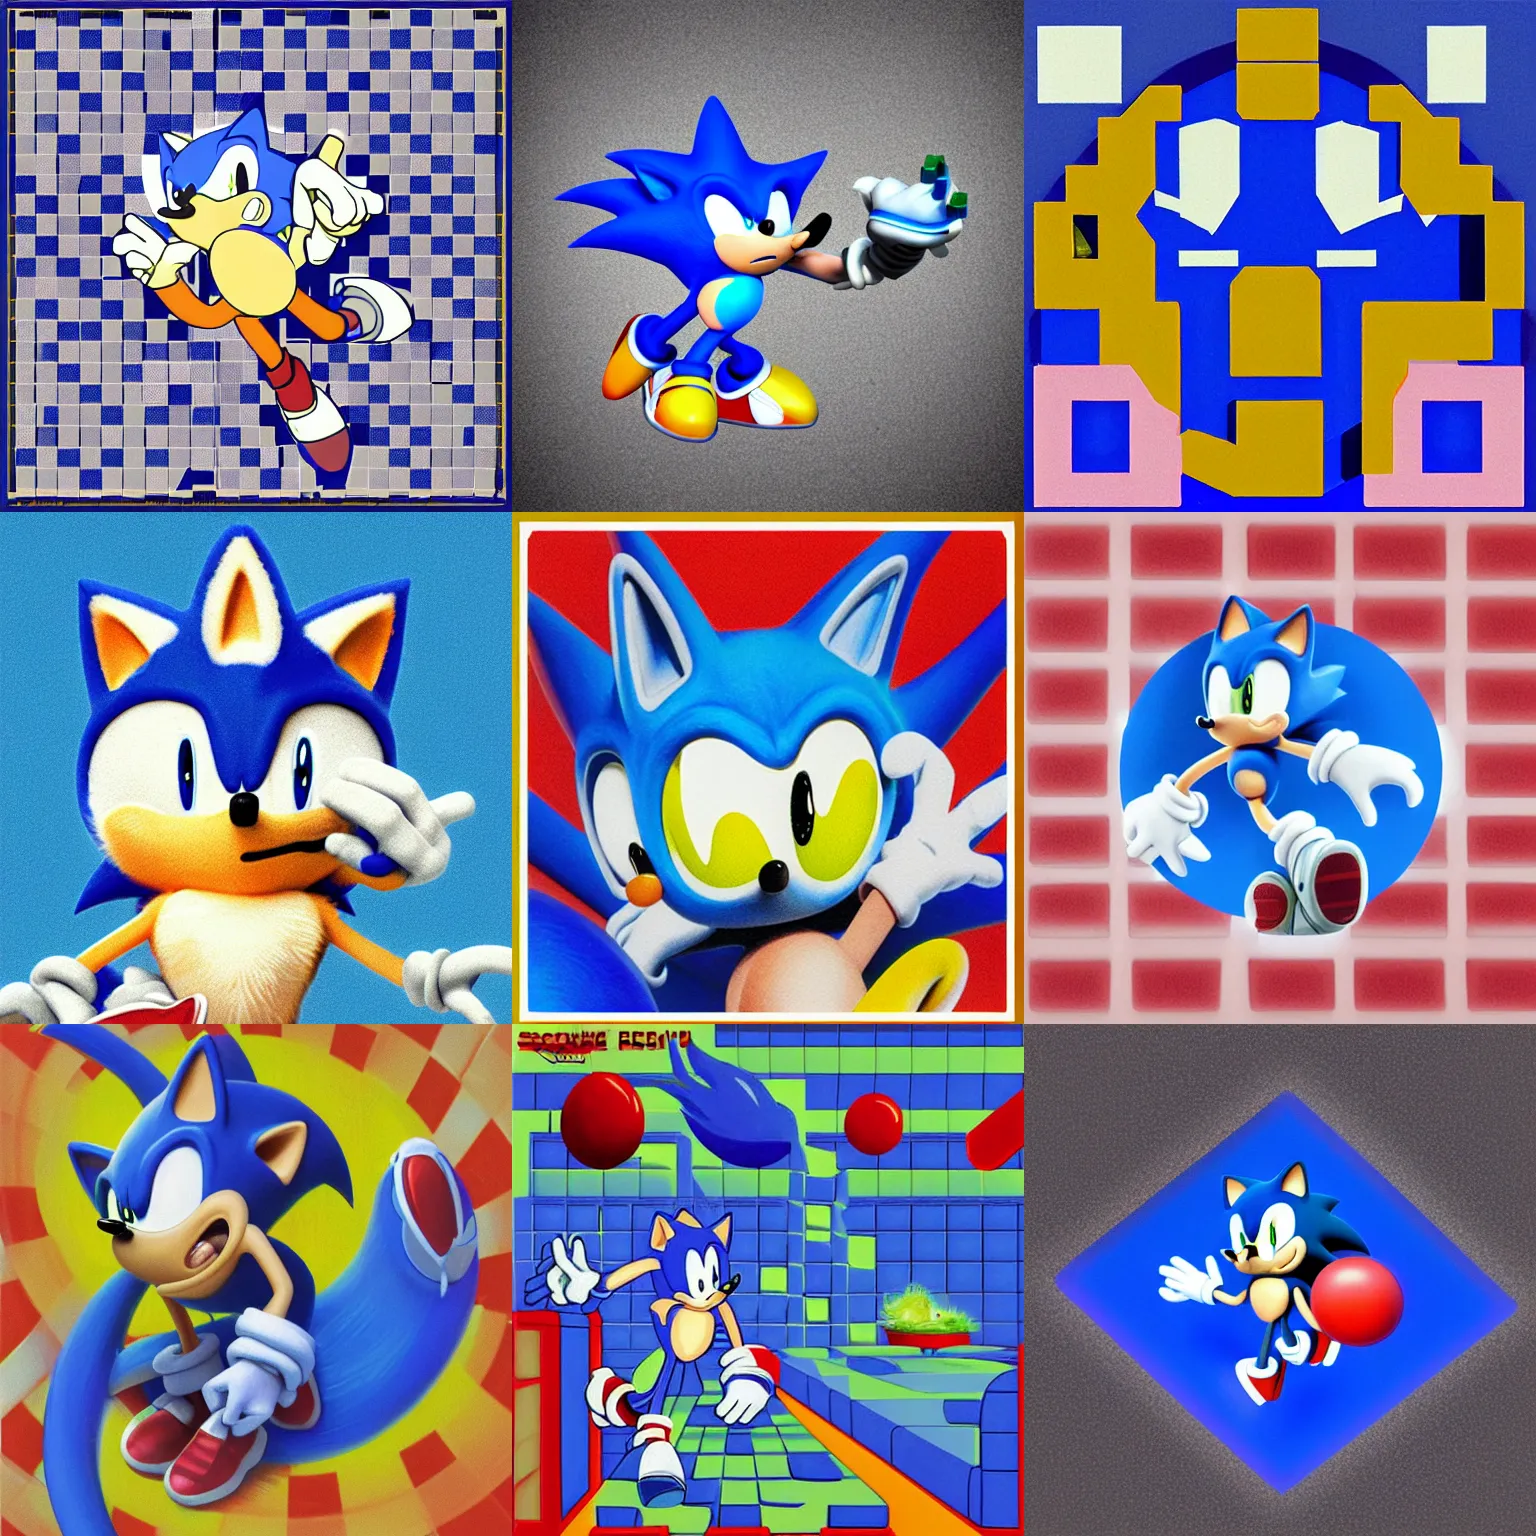 Prompt: sonic hedgehog portrait deconstructivist claymation scifi matte painting lowbrow surreal sonic hedgehog checkerboard planet retro professional soft pastels high quality airbrush art album cover of a liquid dissolving airbrush art tongue sonic the hedgehog swimming through dreams blue checkerboard background 1 9 9 0 s 1 9 9 2 sega genesis video game album cover